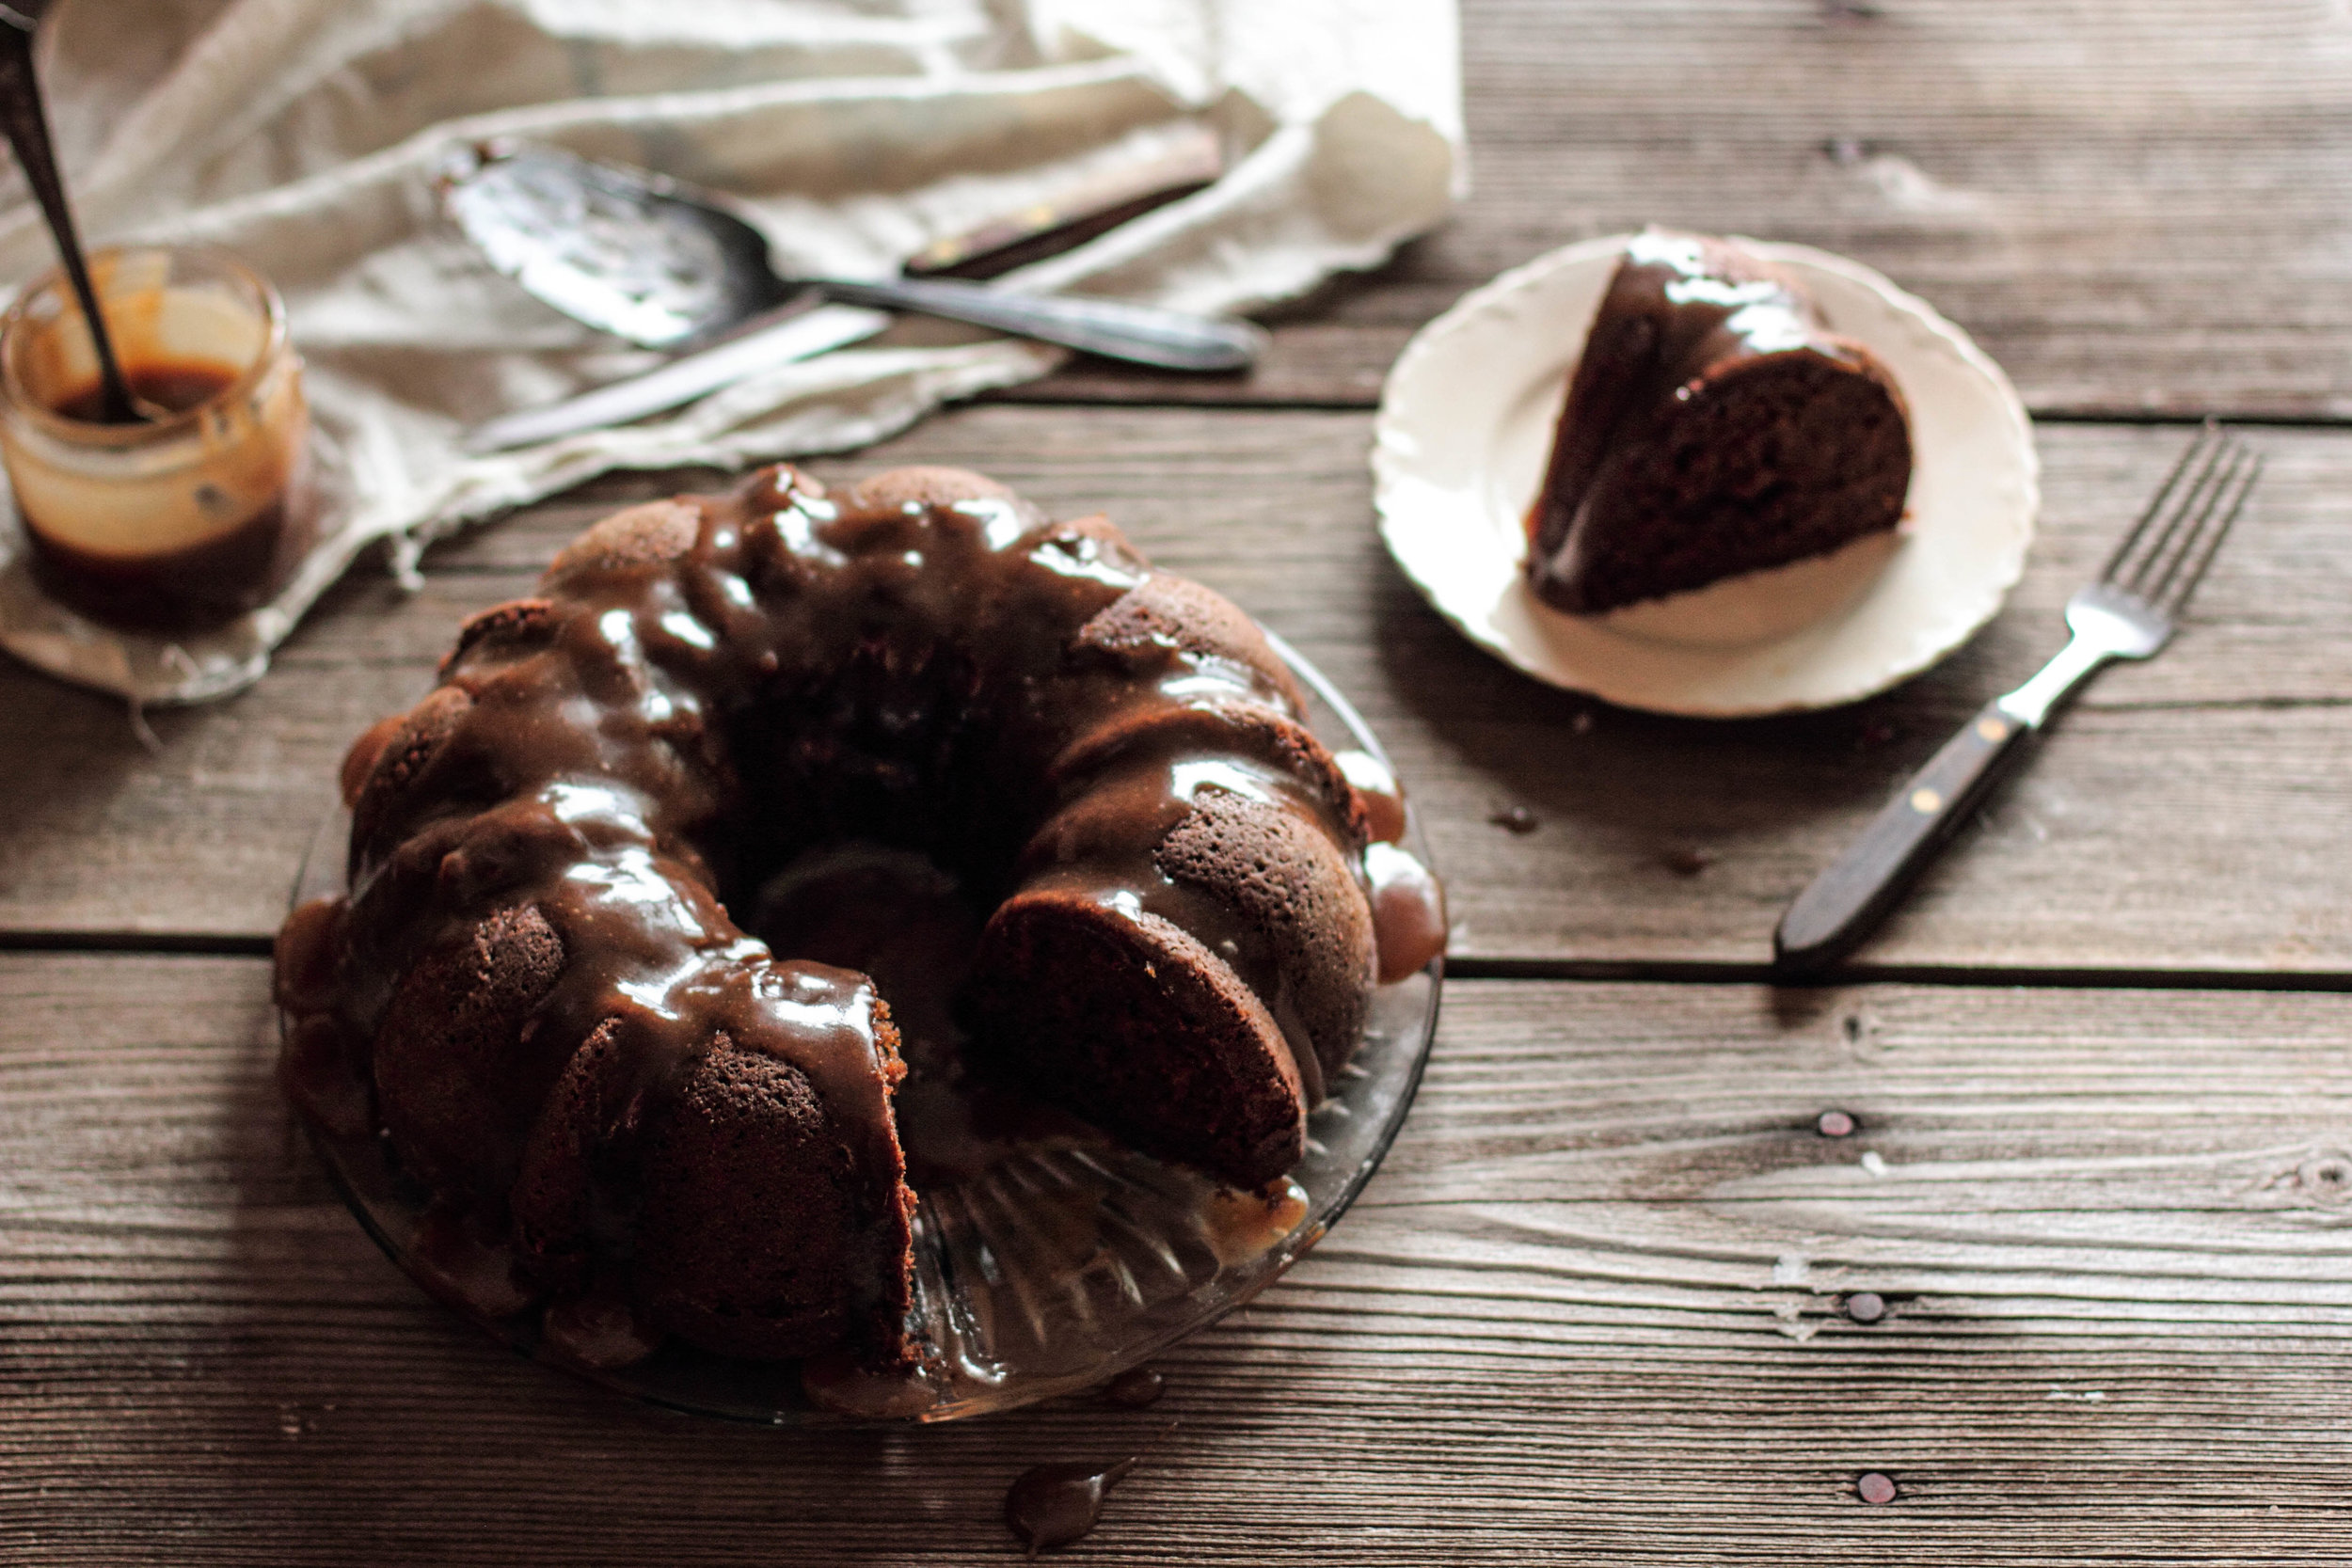 Gingerbread Bundt Cake with Maple Glaze - The Gourmet Gourmand